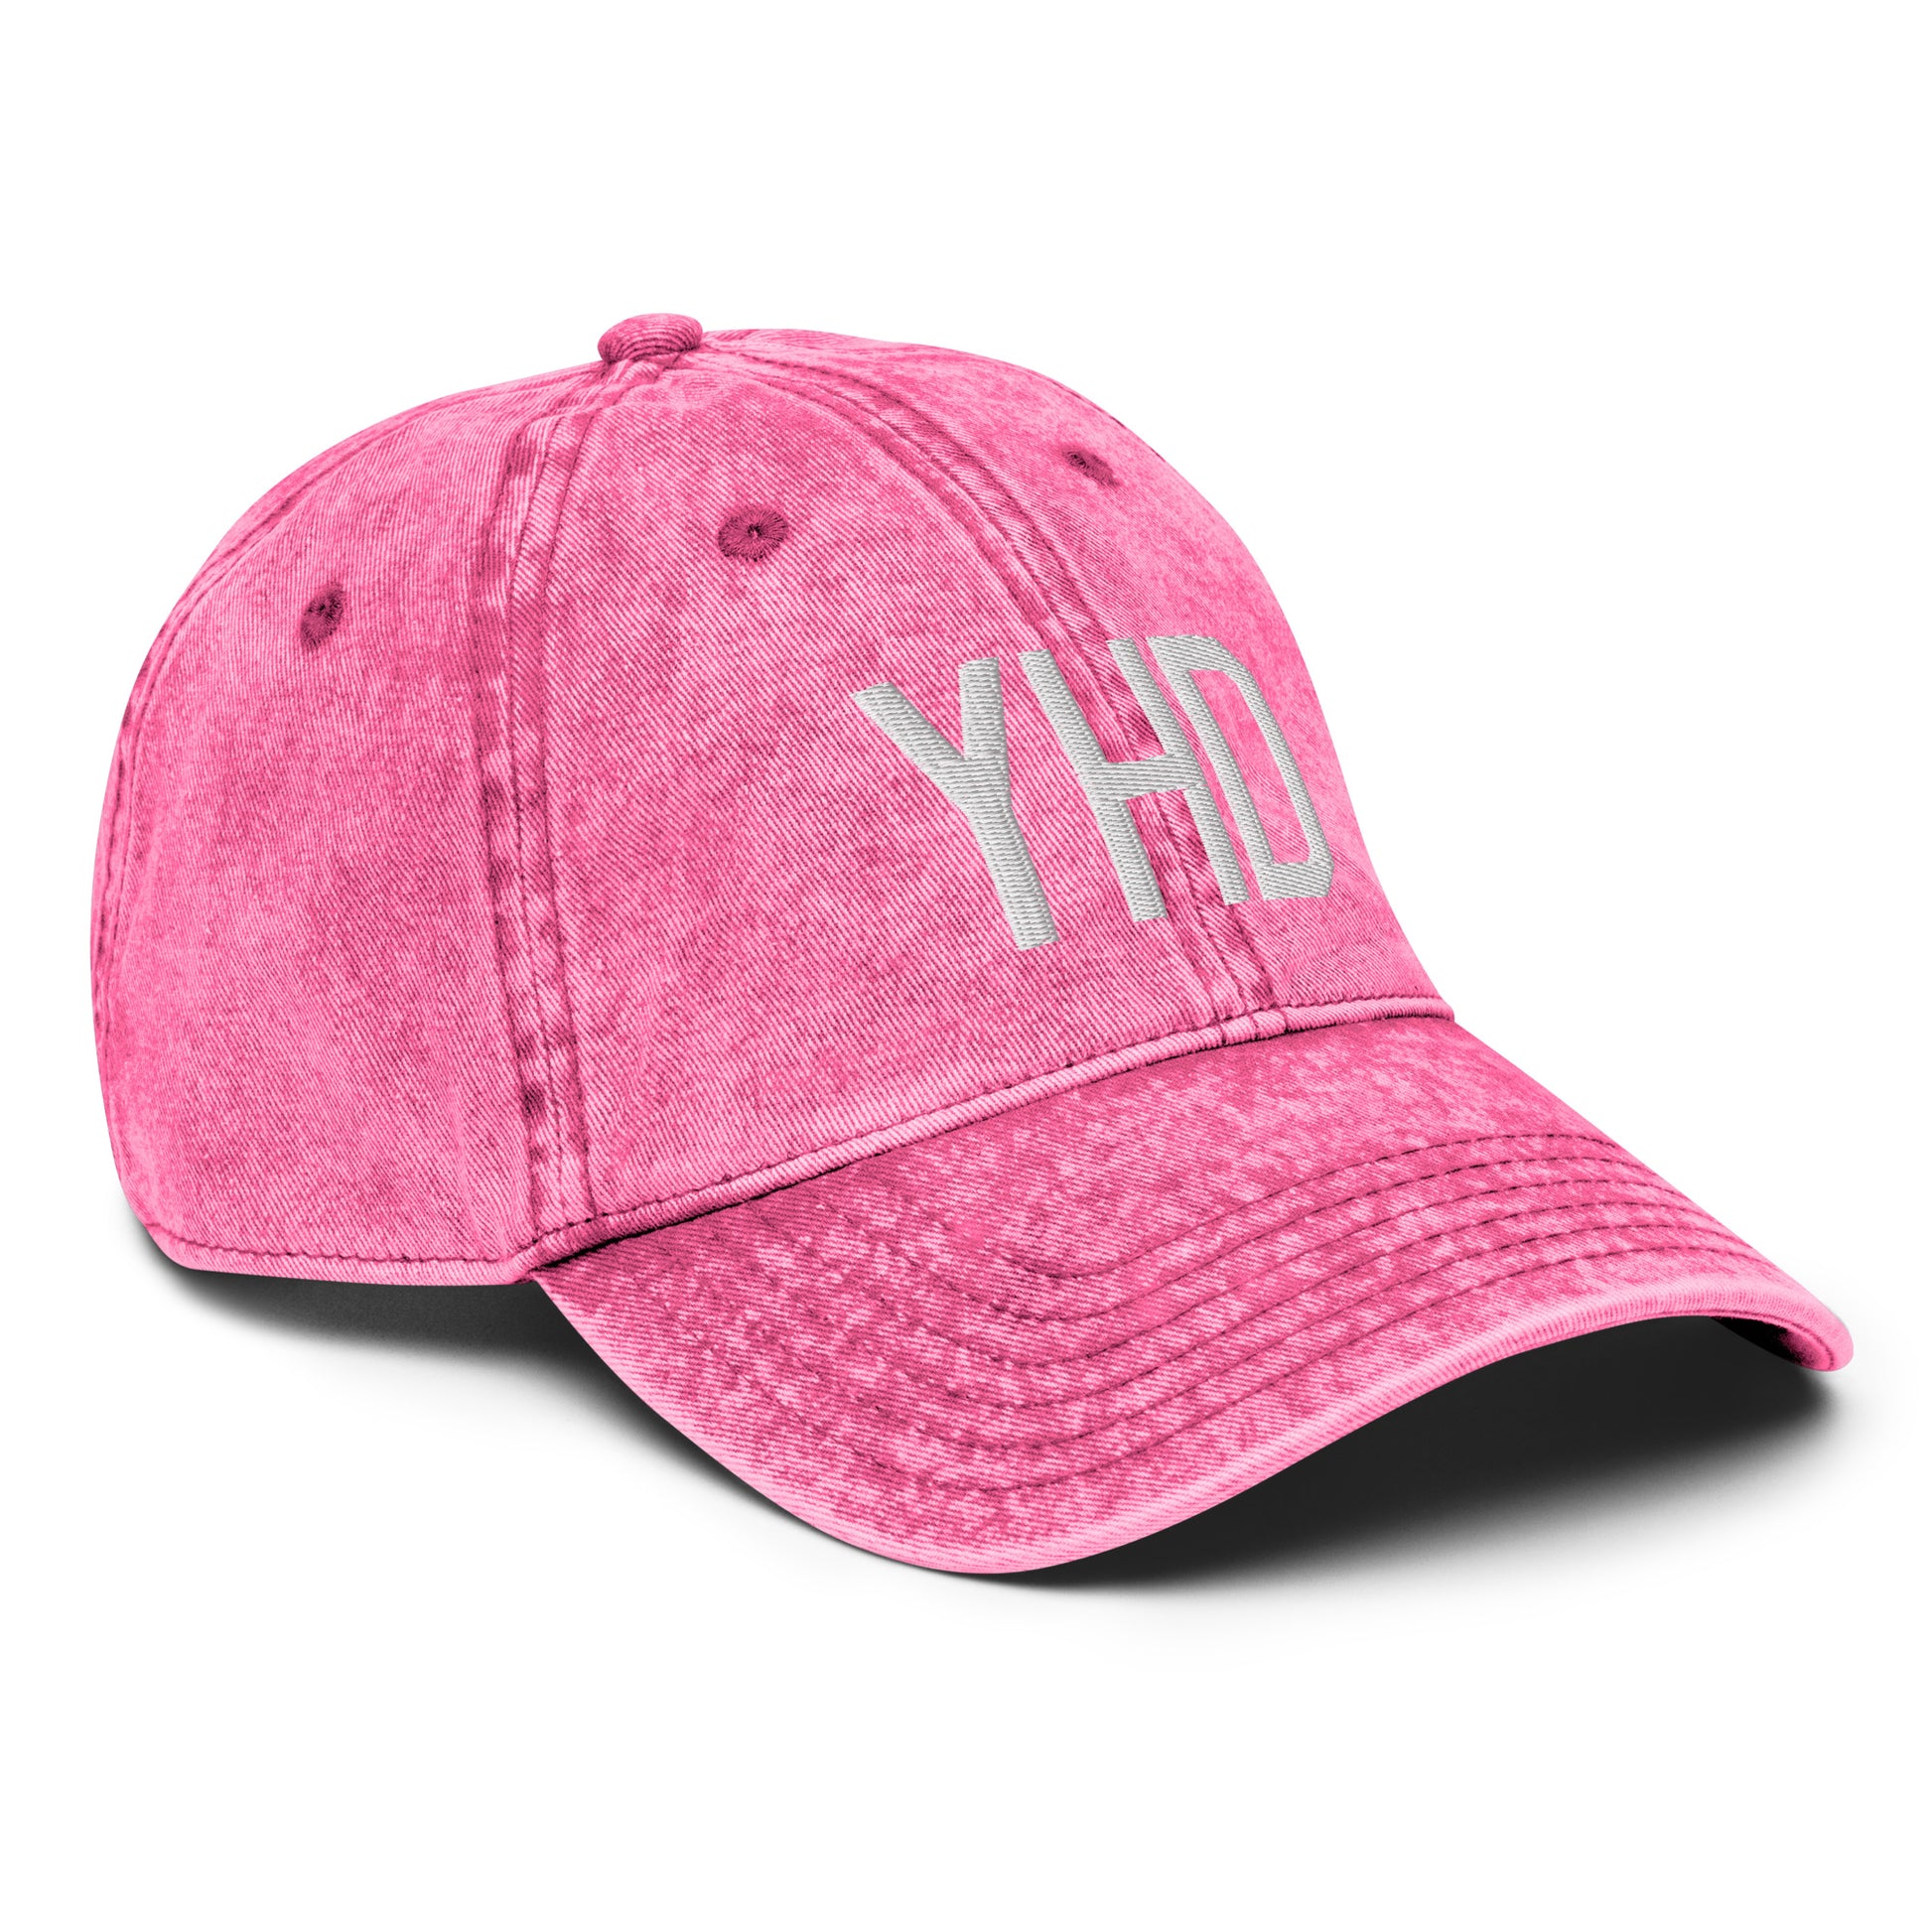 Airport Code Twill Cap - White • YHD Dryden • YHM Designs - Image 27